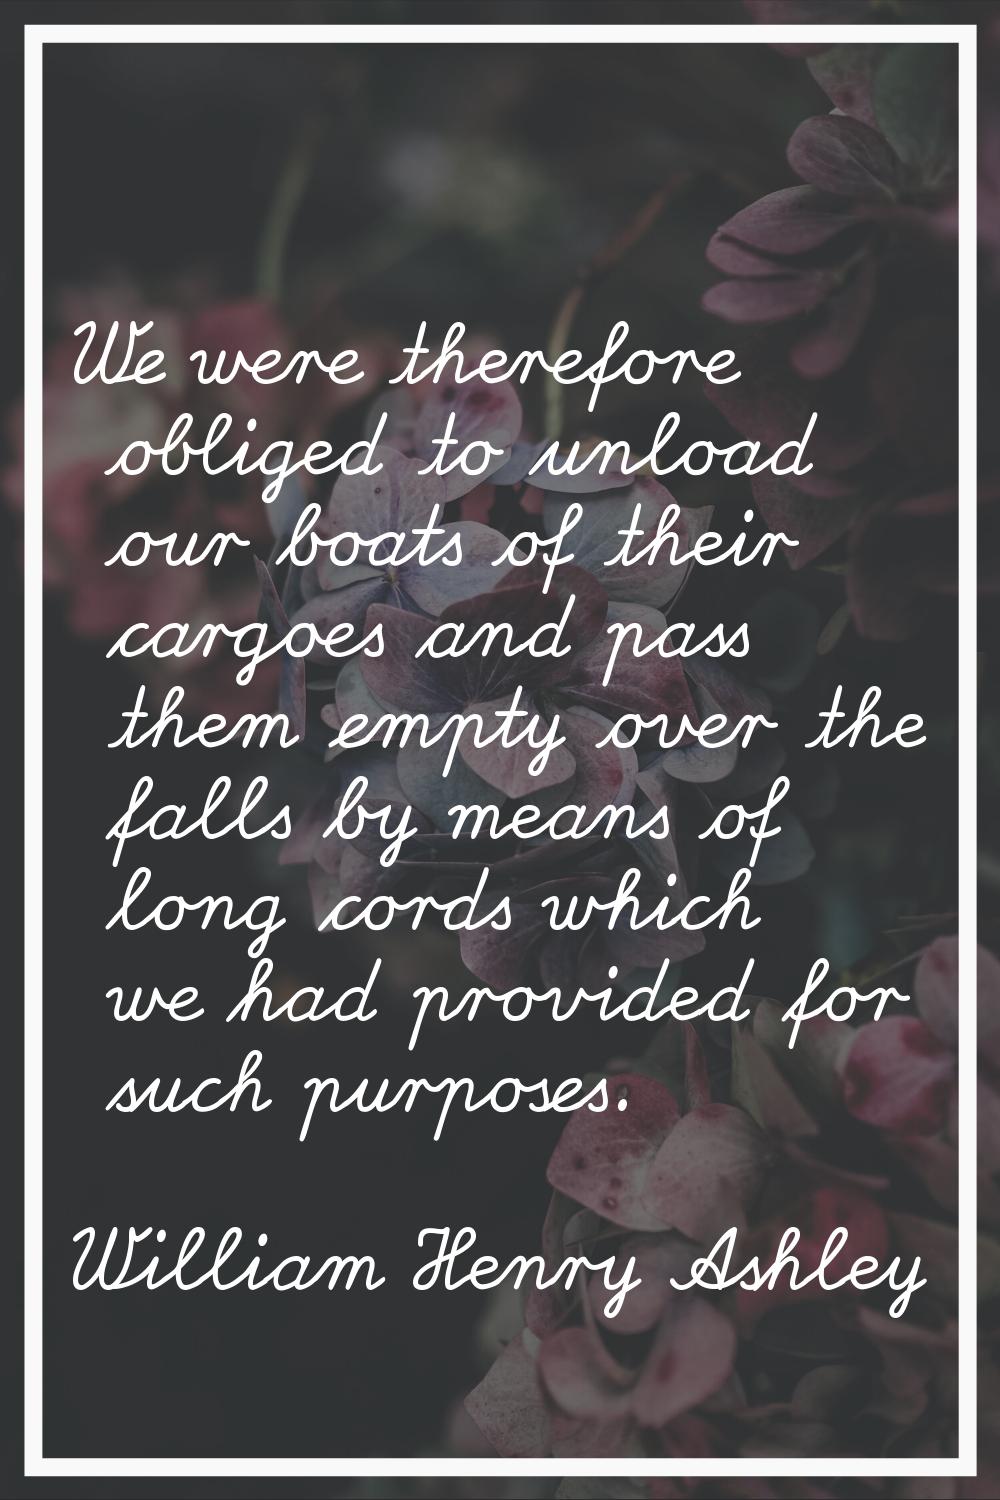 We were therefore obliged to unload our boats of their cargoes and pass them empty over the falls b